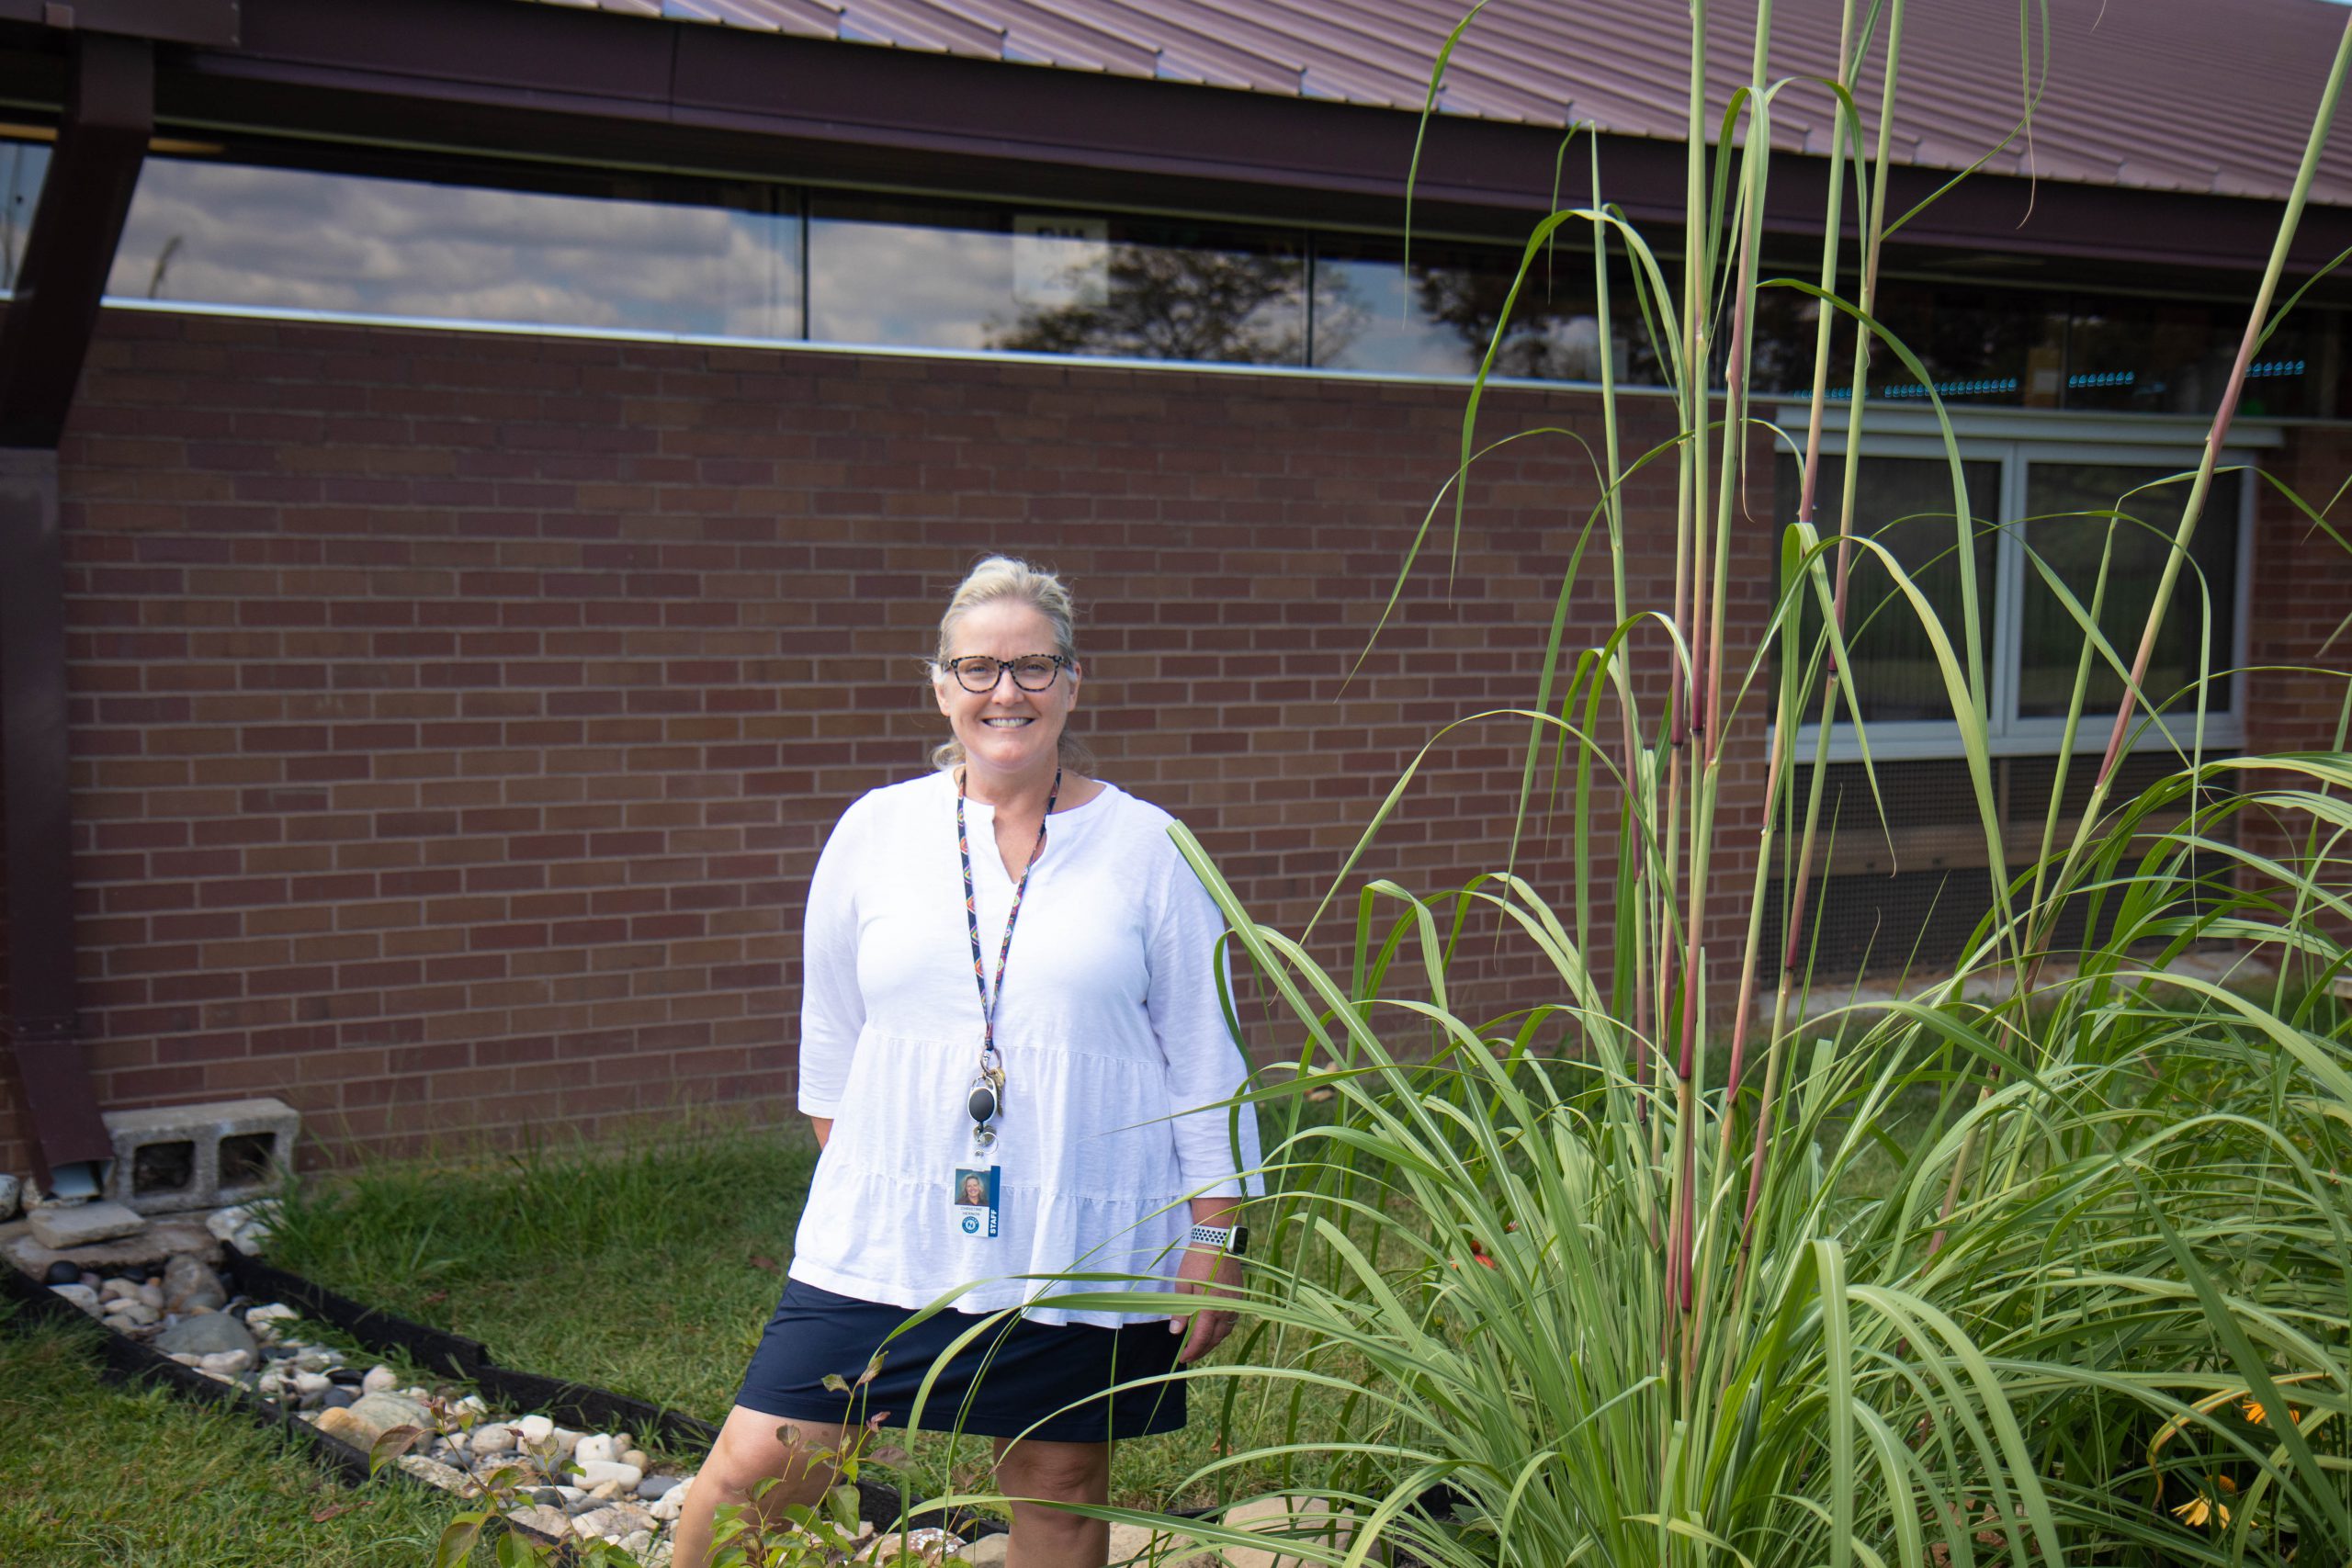 Teacher at Brown Elementary Recognized for Environmental Efforts